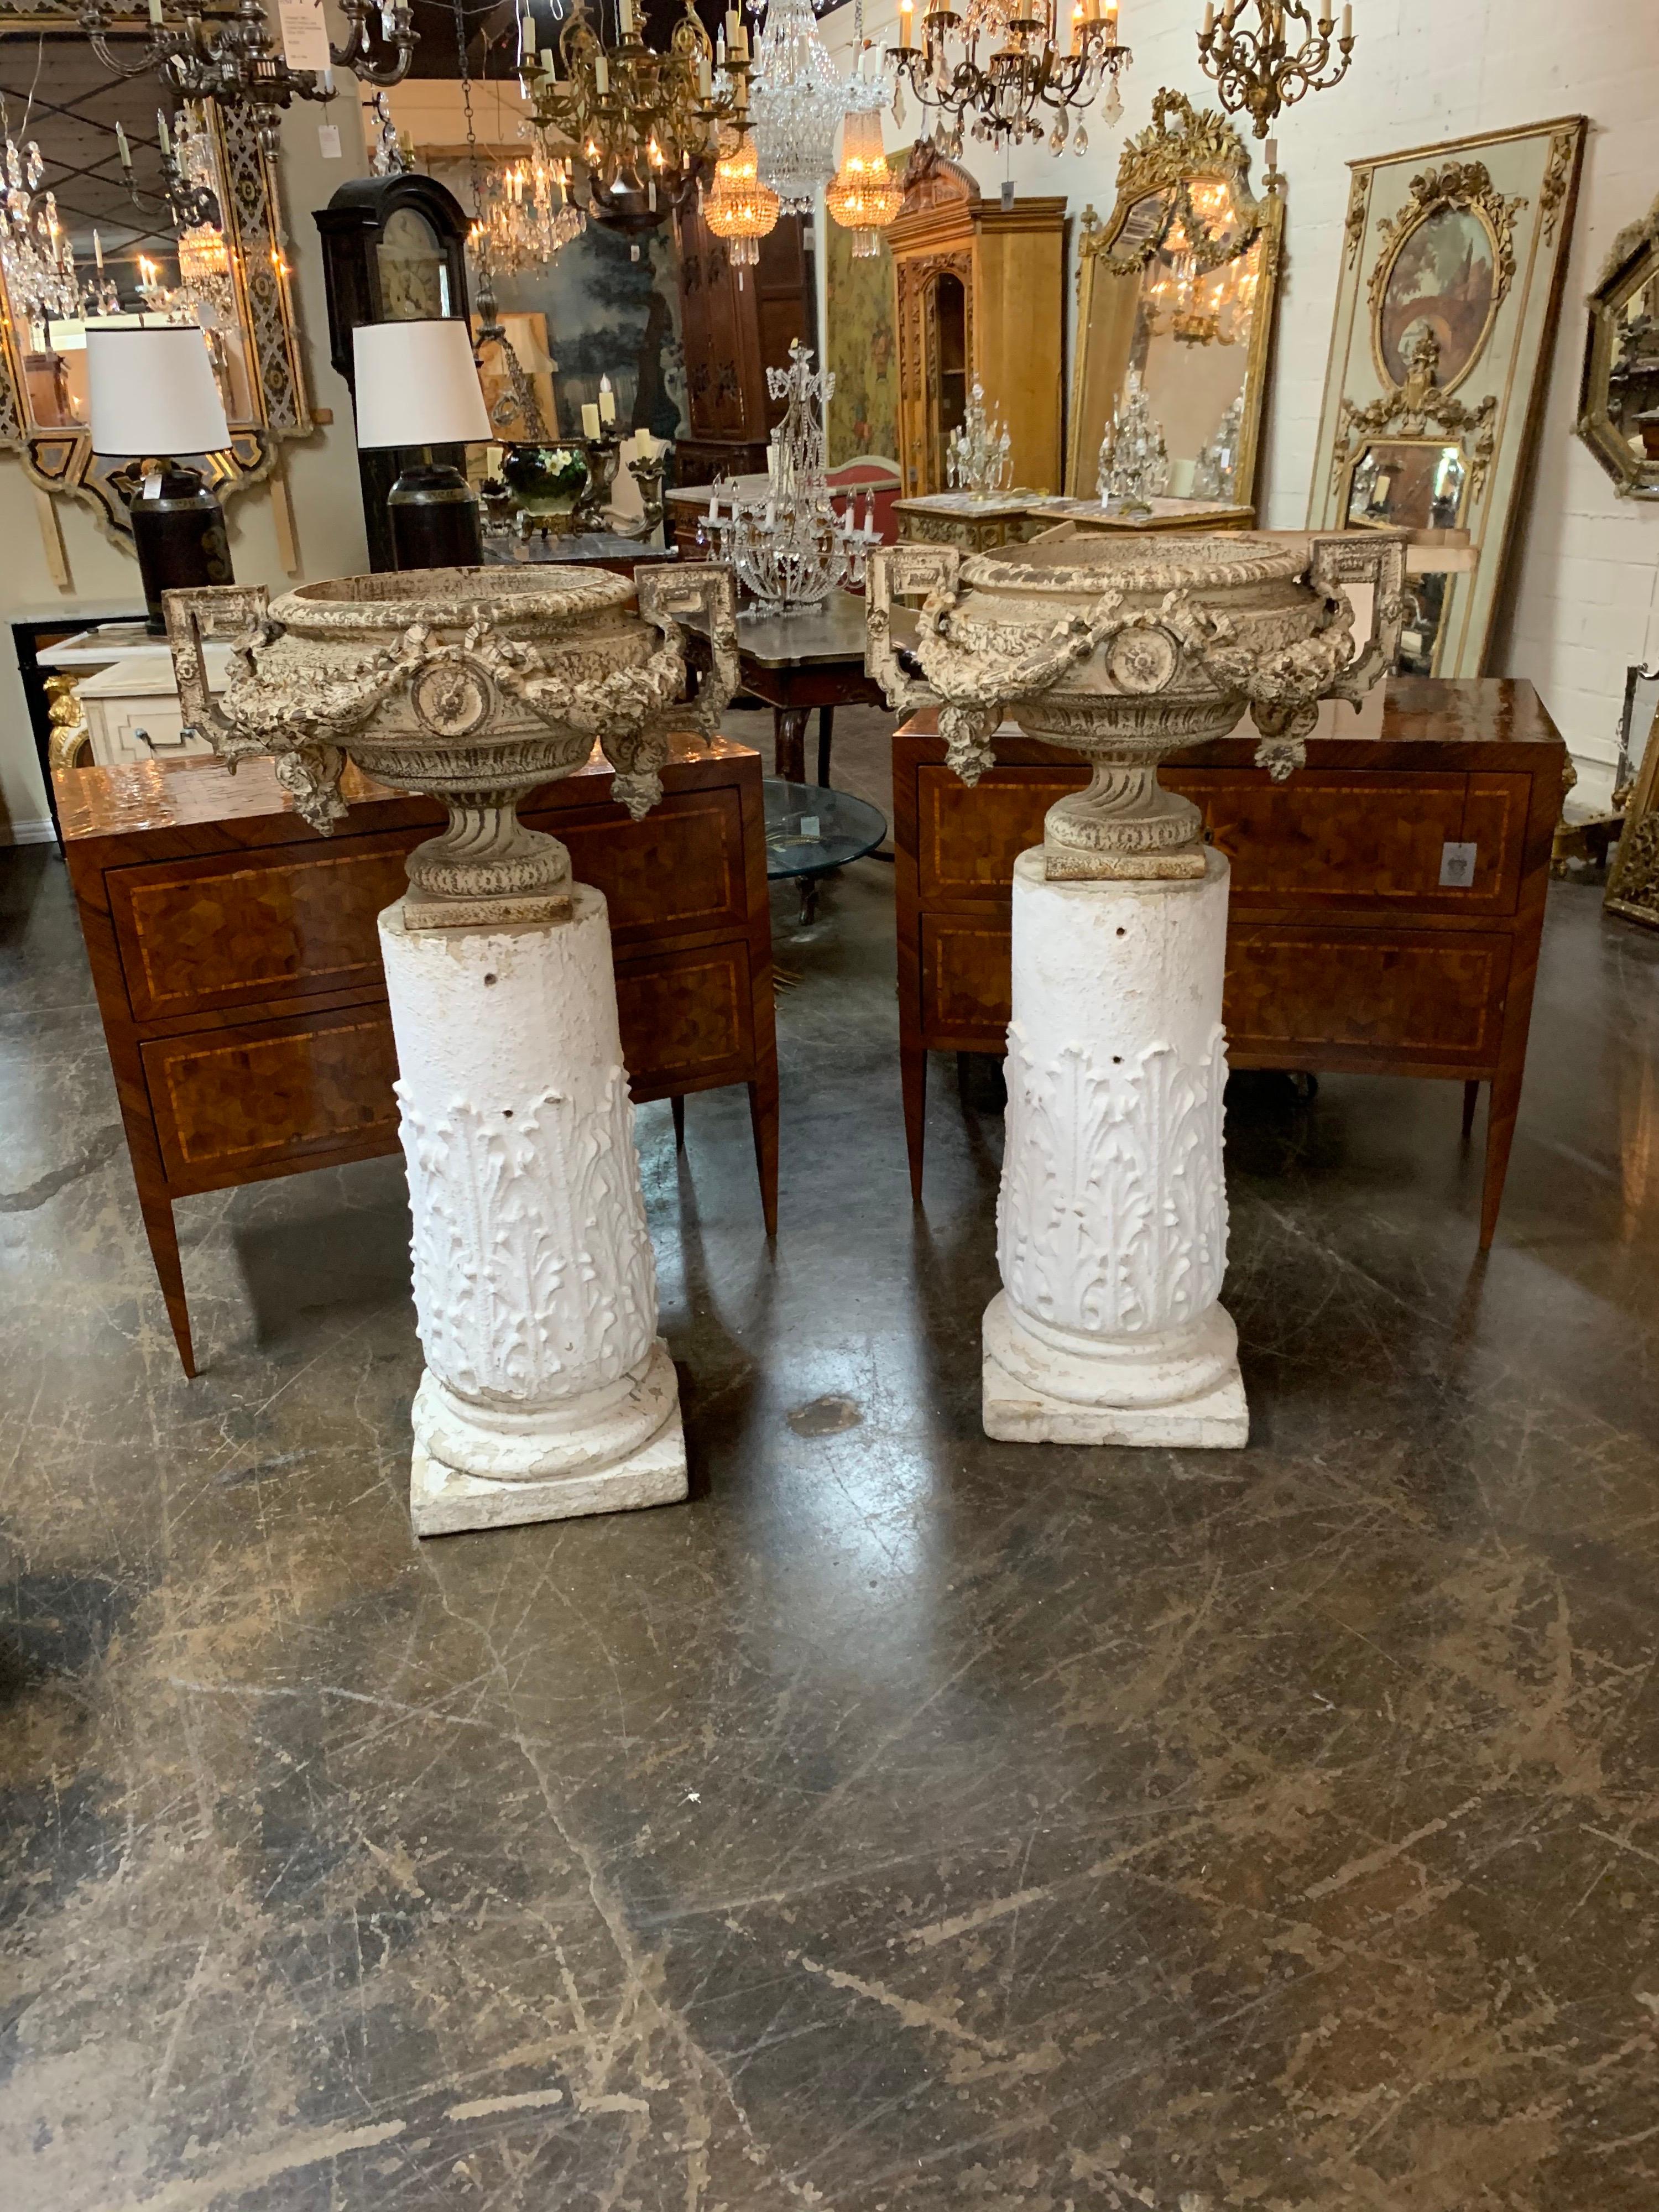 Fine pair of 18th century French iron garden urns on gesso pedestal bases. Ample size on the urns would make for a substantial planting. So pretty!